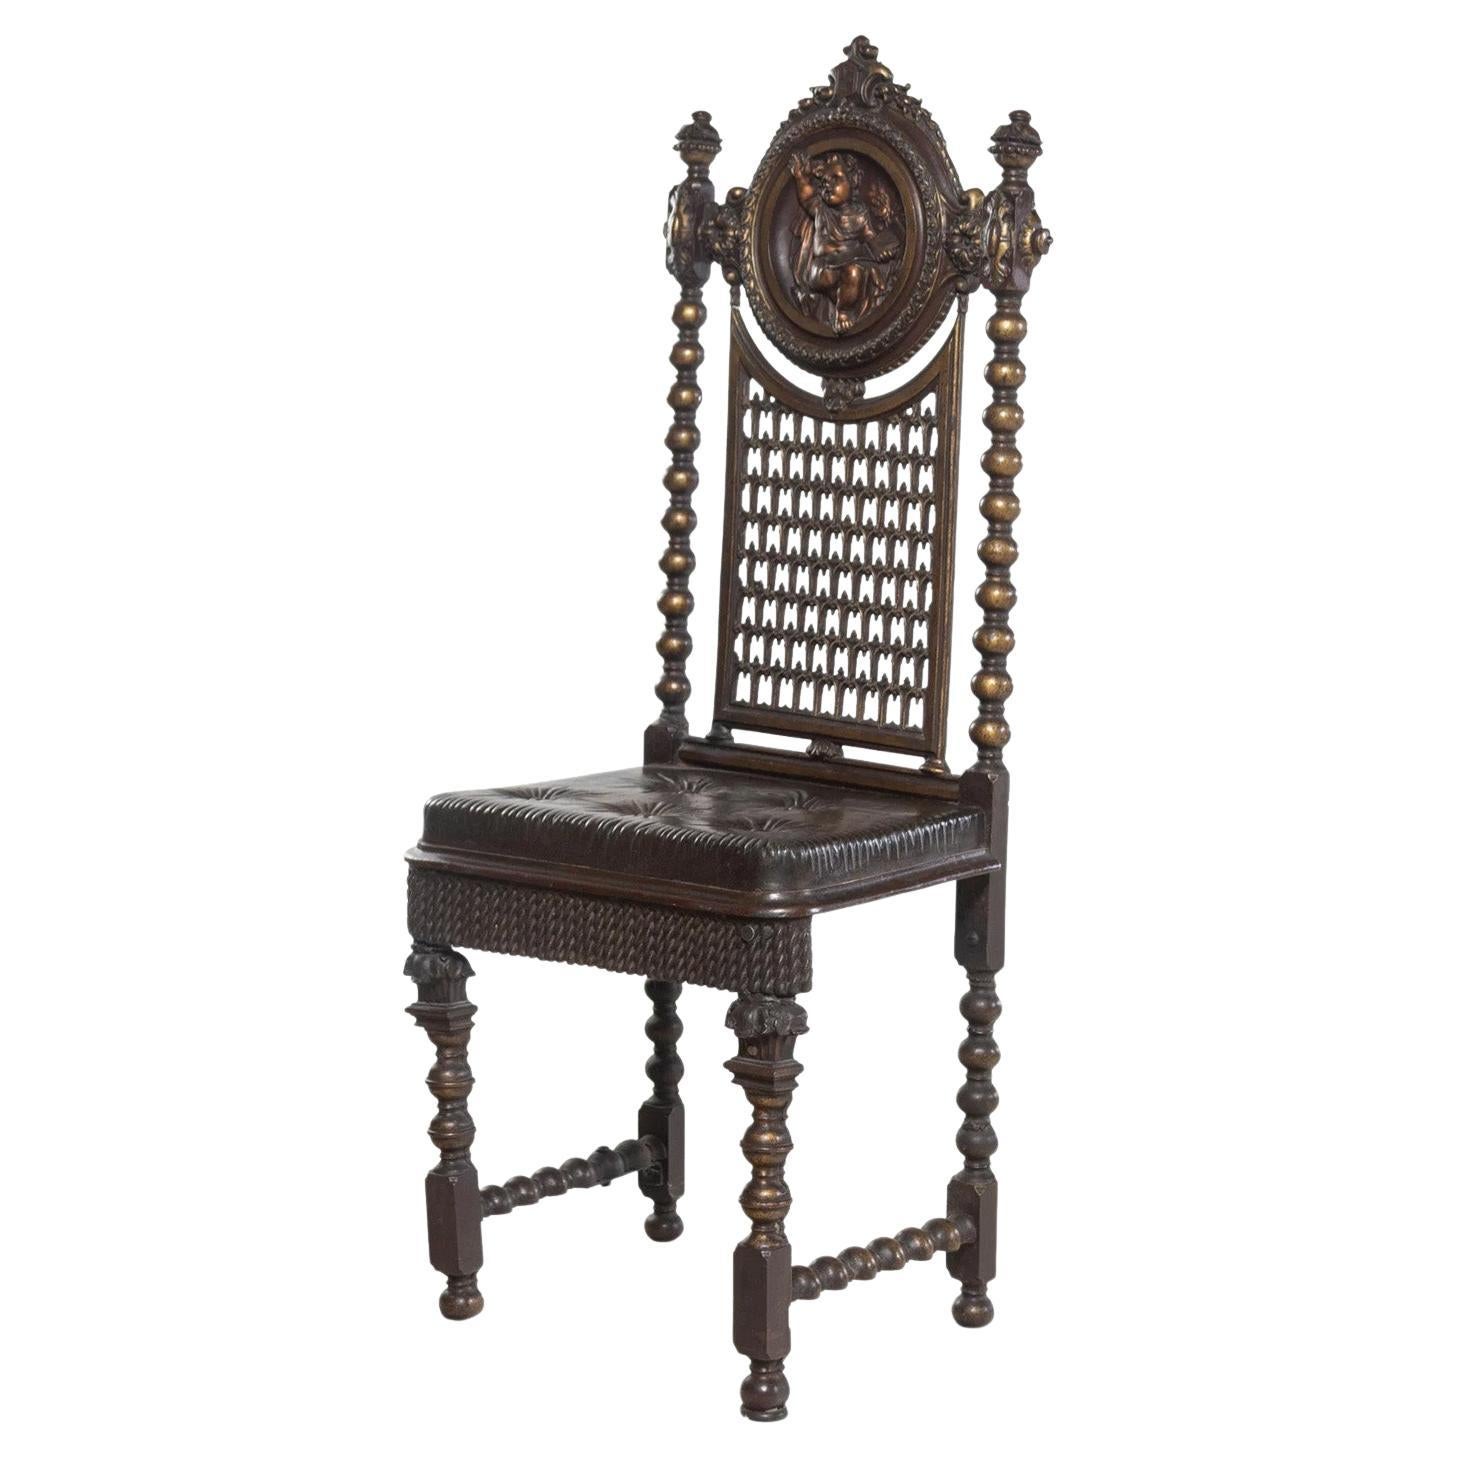 19th Century English Renaissance Revival Style Bronzed Metal Chair For Sale